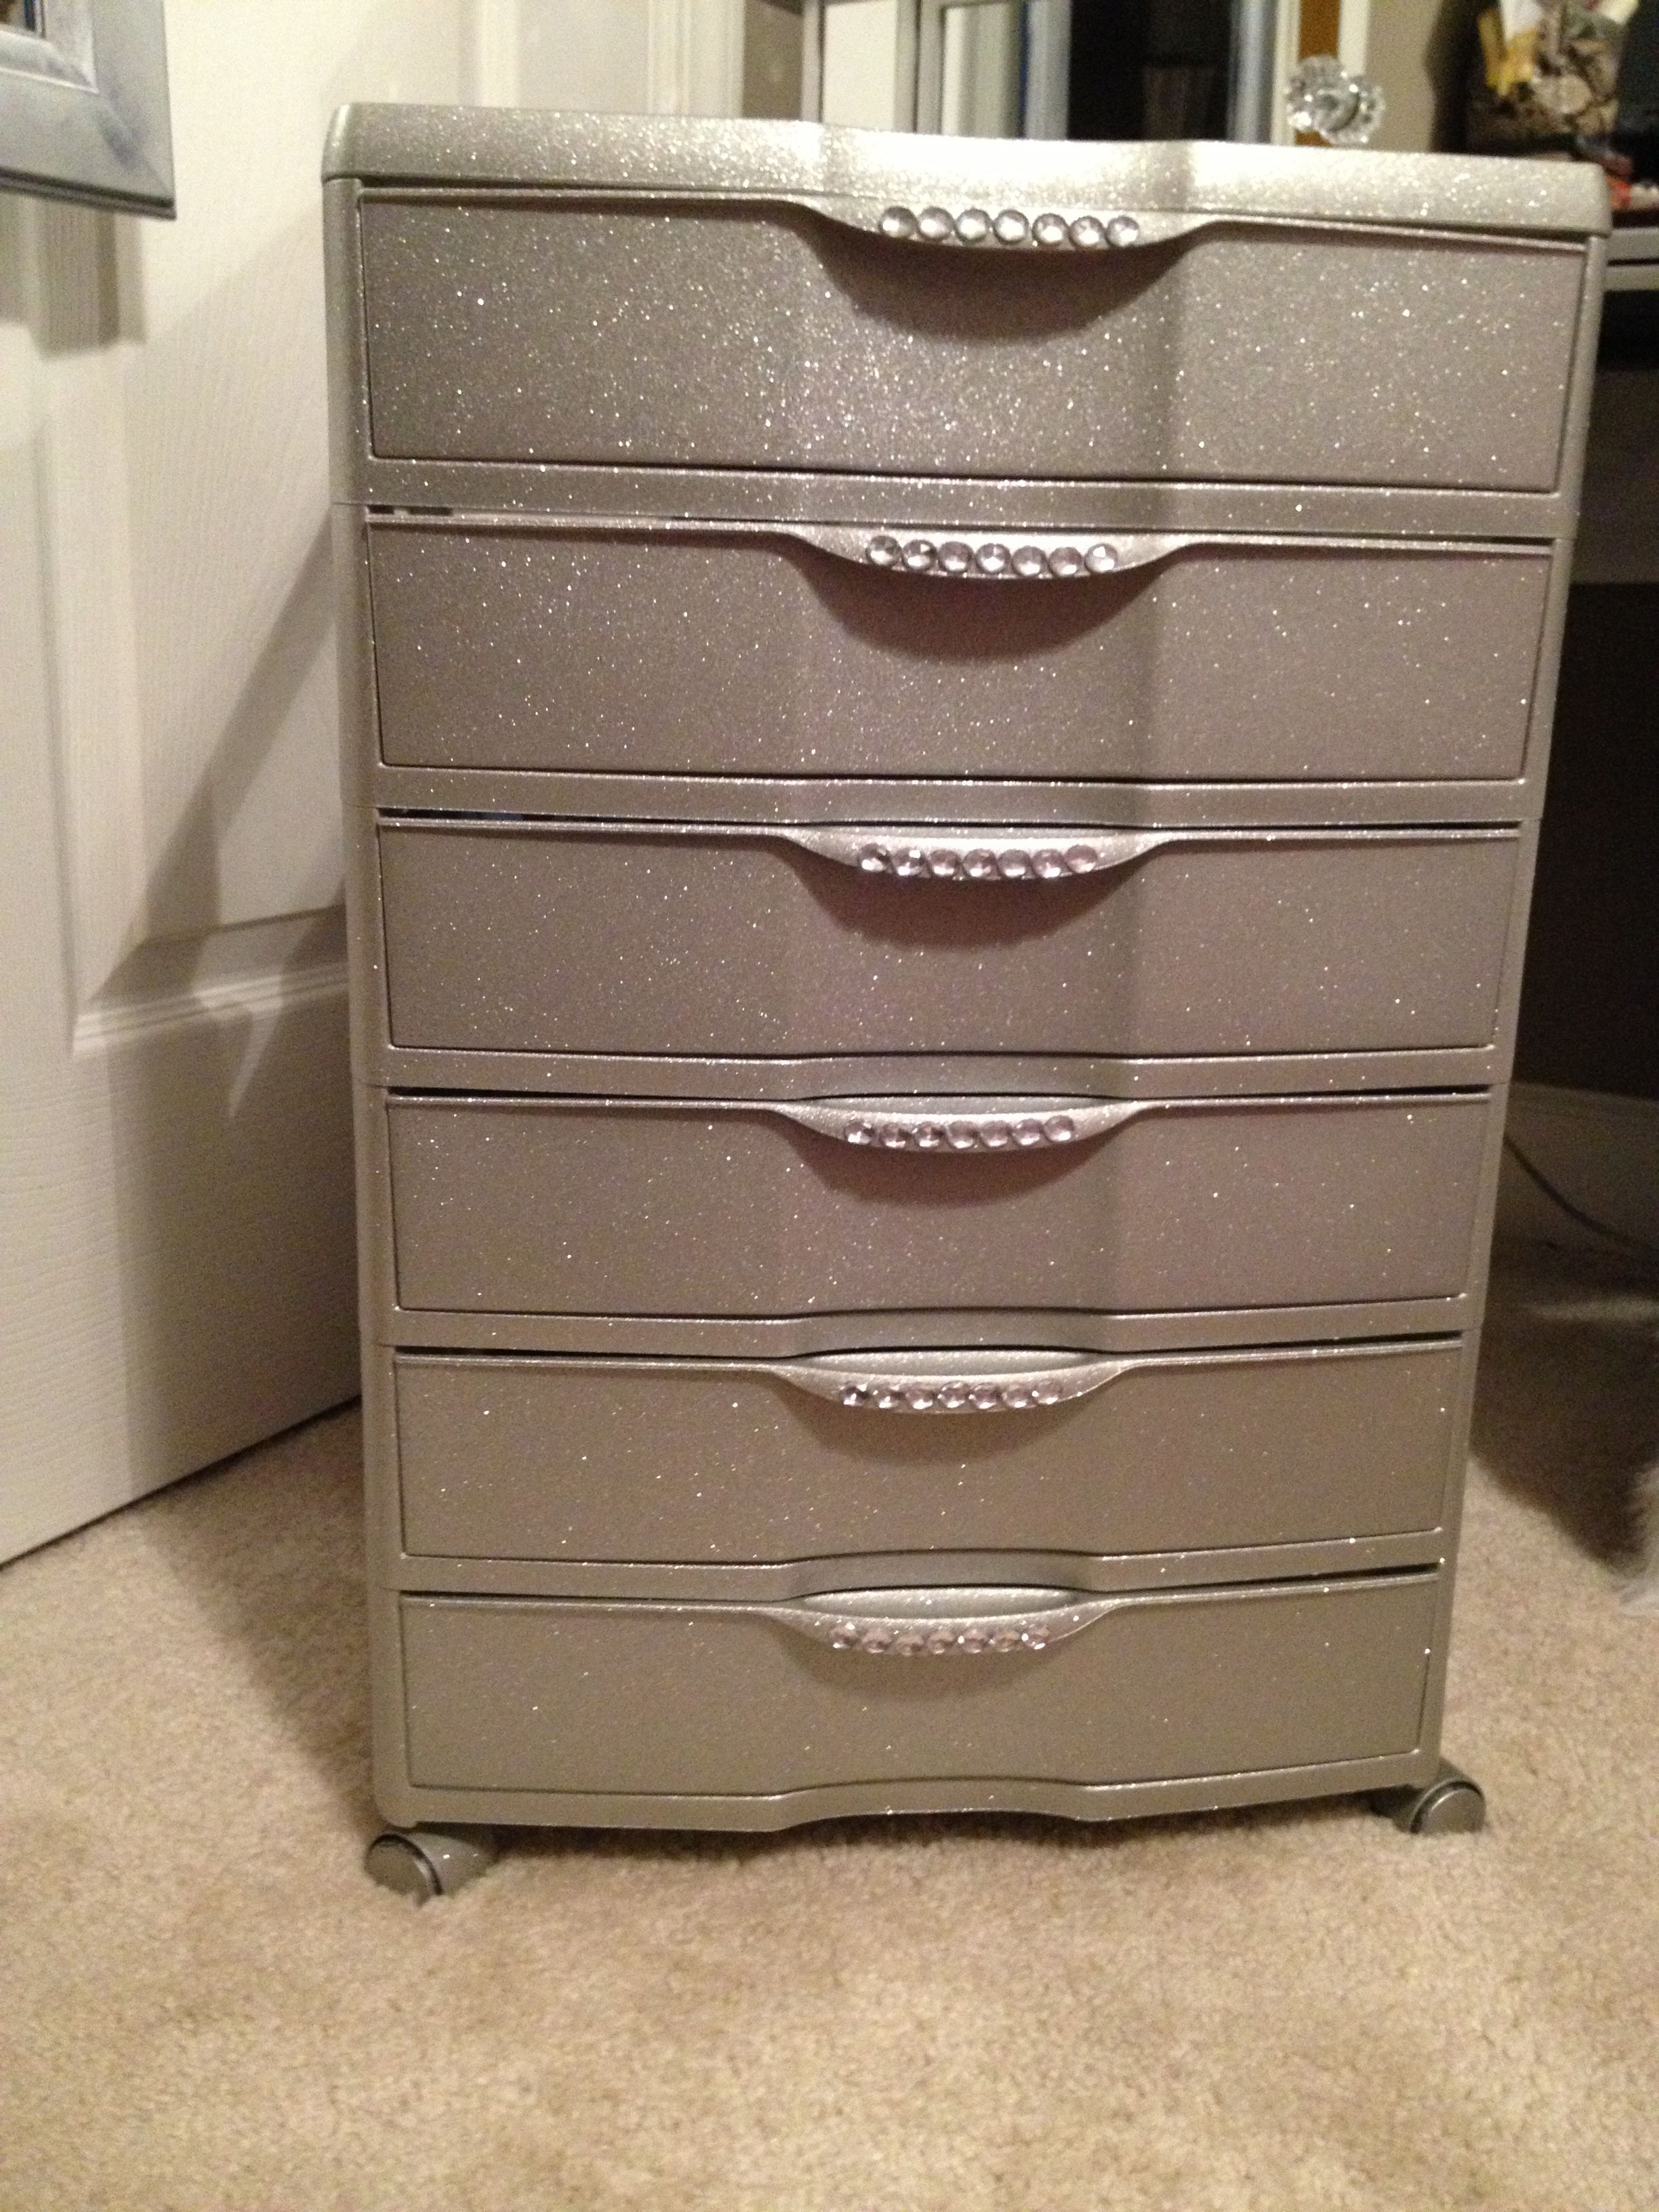 Plastic 6 Drawer Bin From Walmart Spray Paint Glitter And for dimensions 2448 X 3264